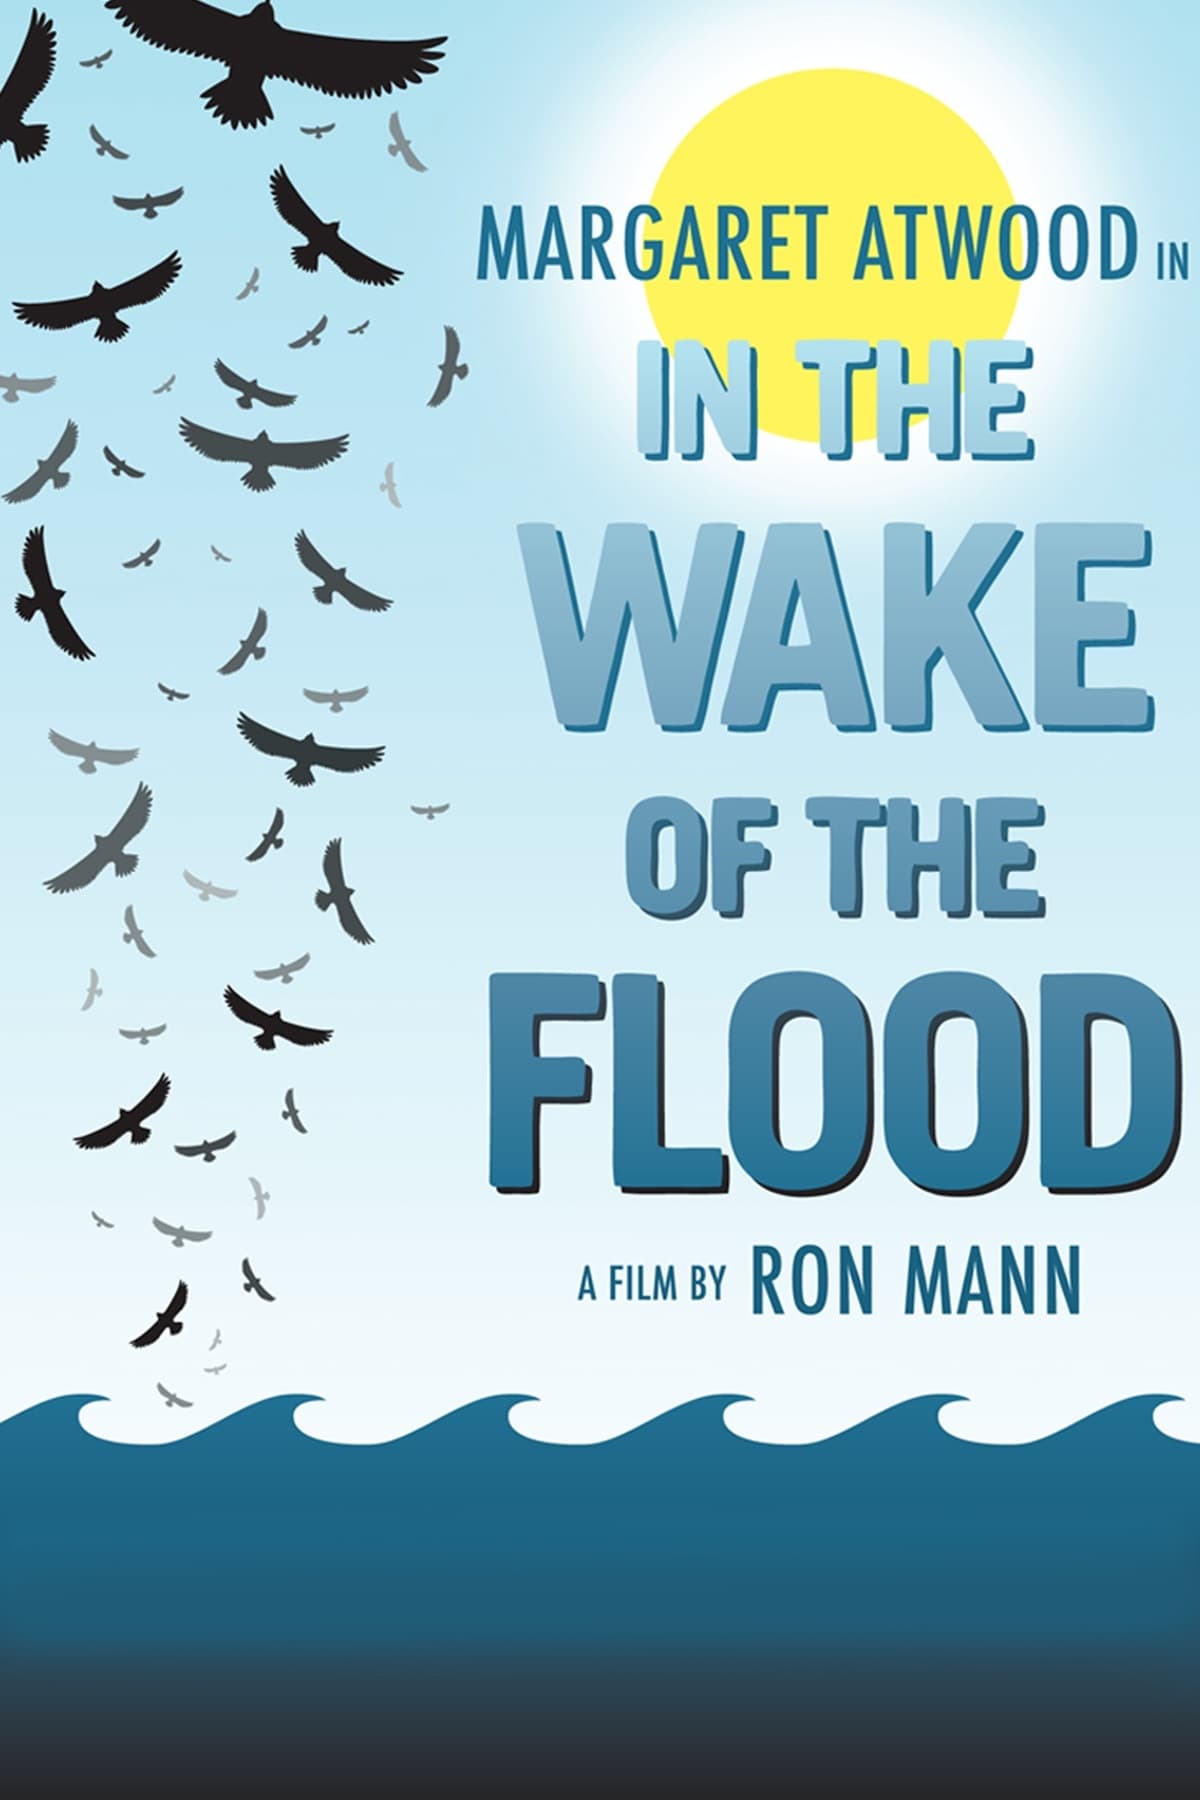 In the Wake of the Flood